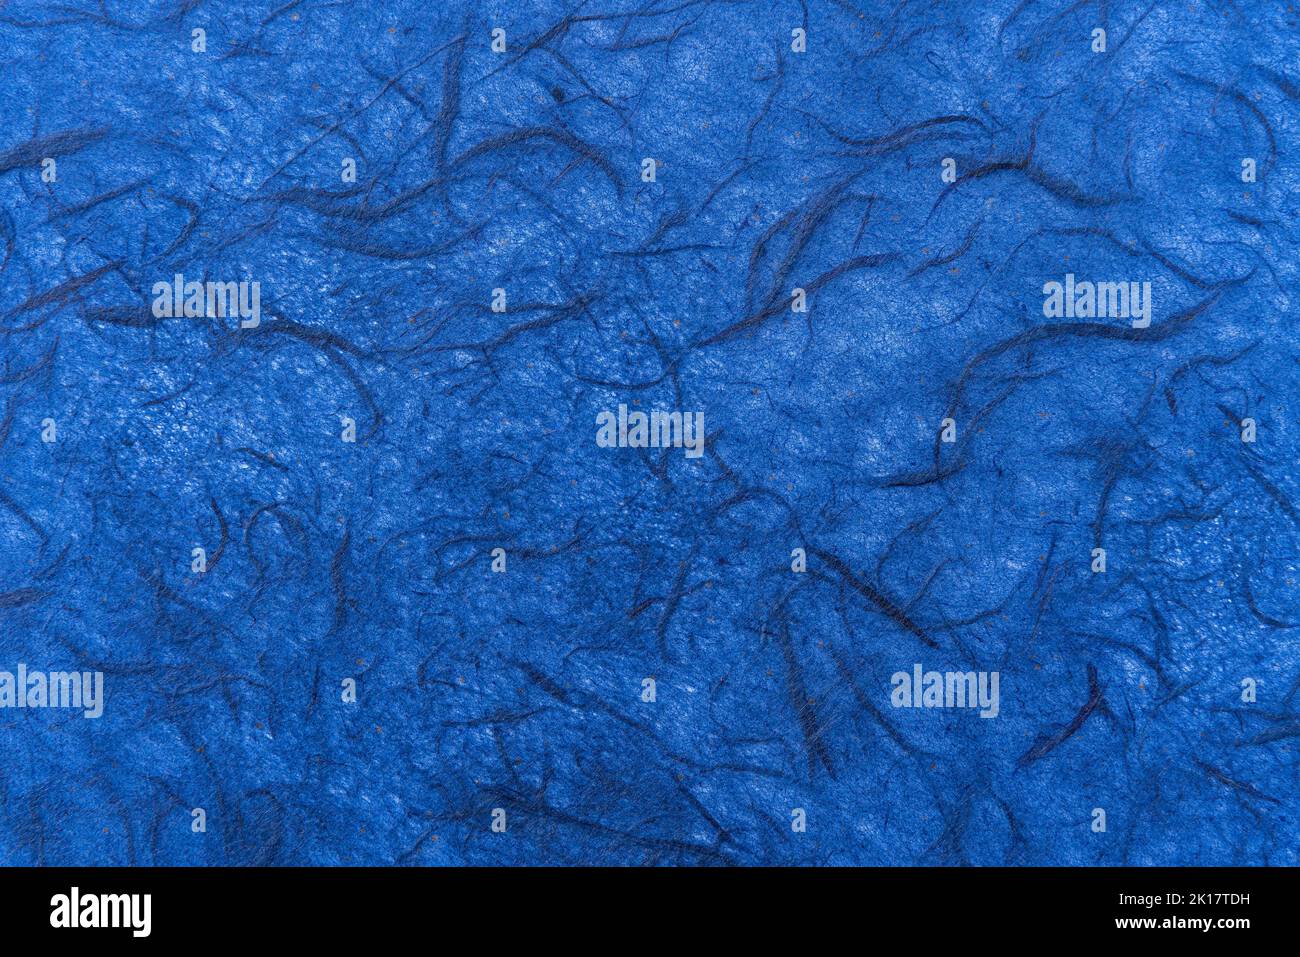 Straw paper texture background made from recycled sustainable biodegradable resources with a natural blue textured effect pattern, stock photo image Stock Photo